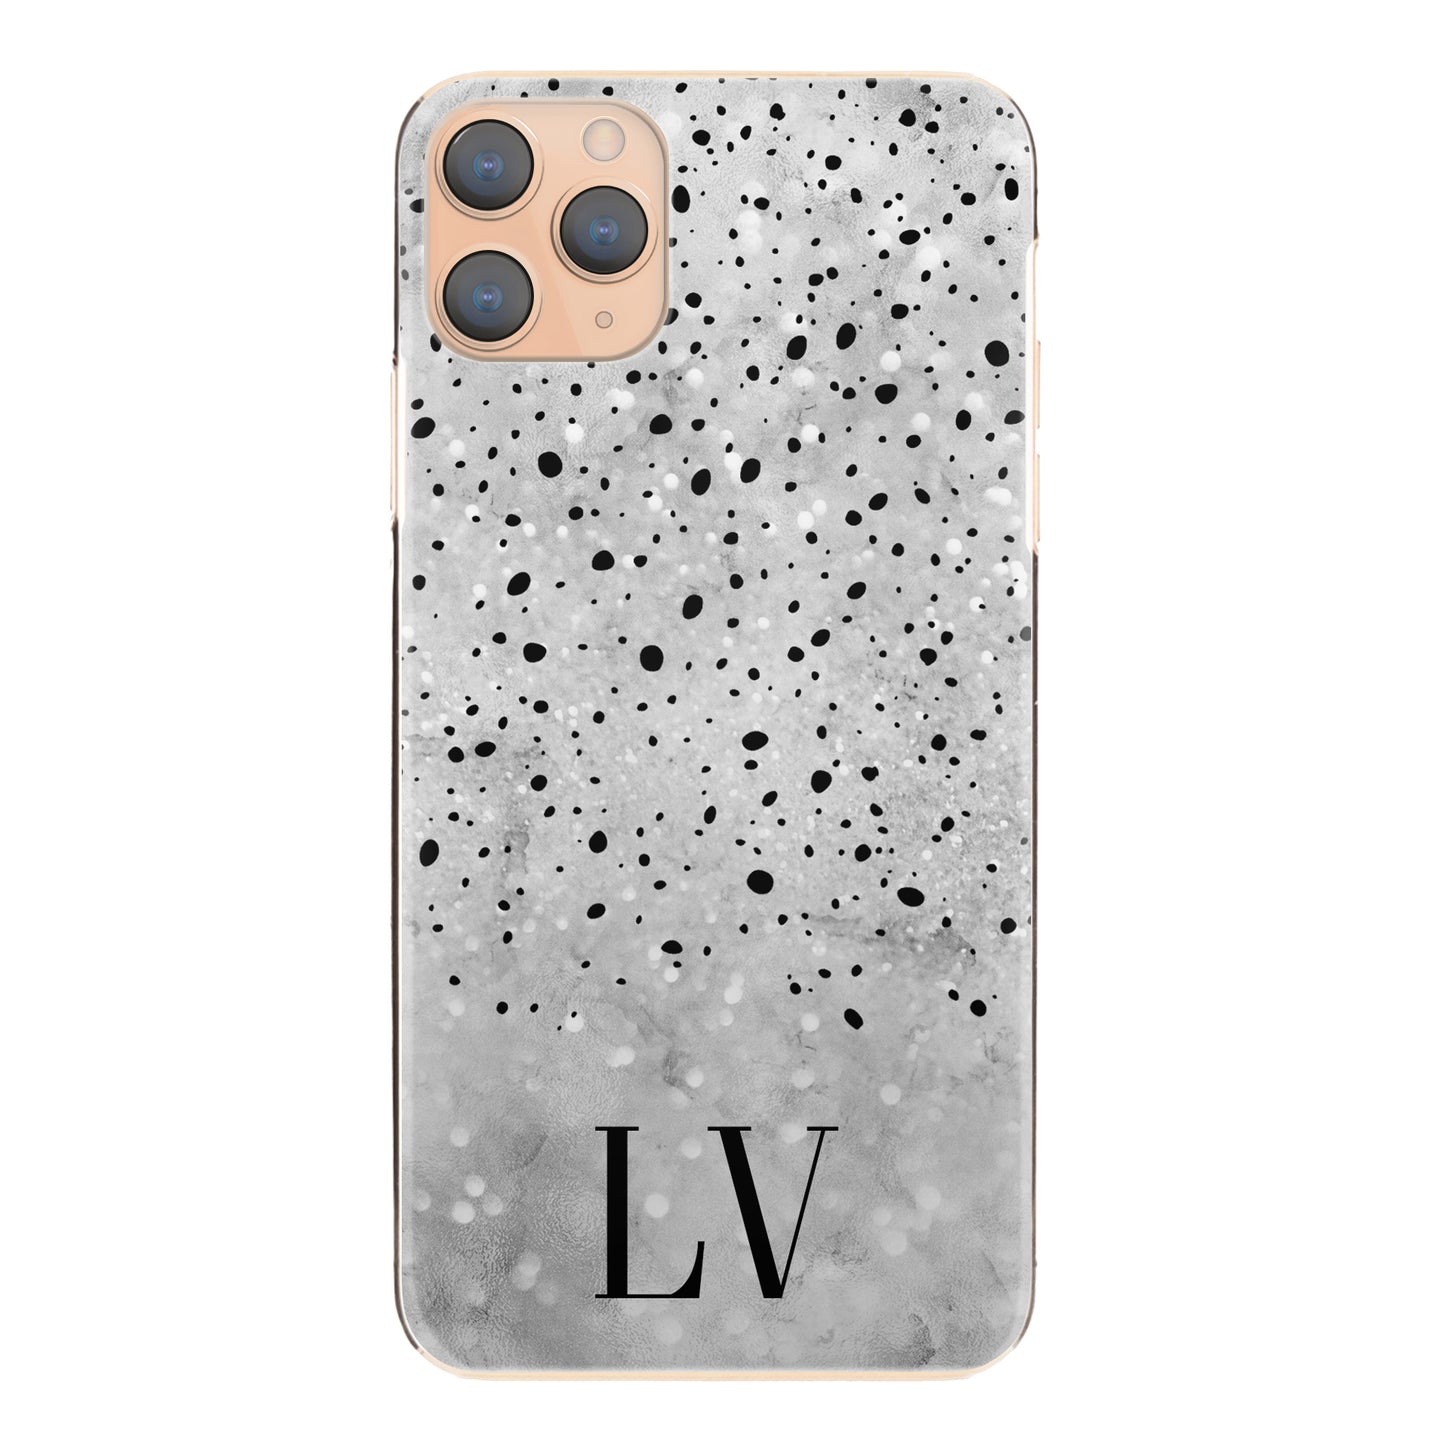 Personalised Google Phone Hard Case with Classy Initials on Textured Grey and Black Dots